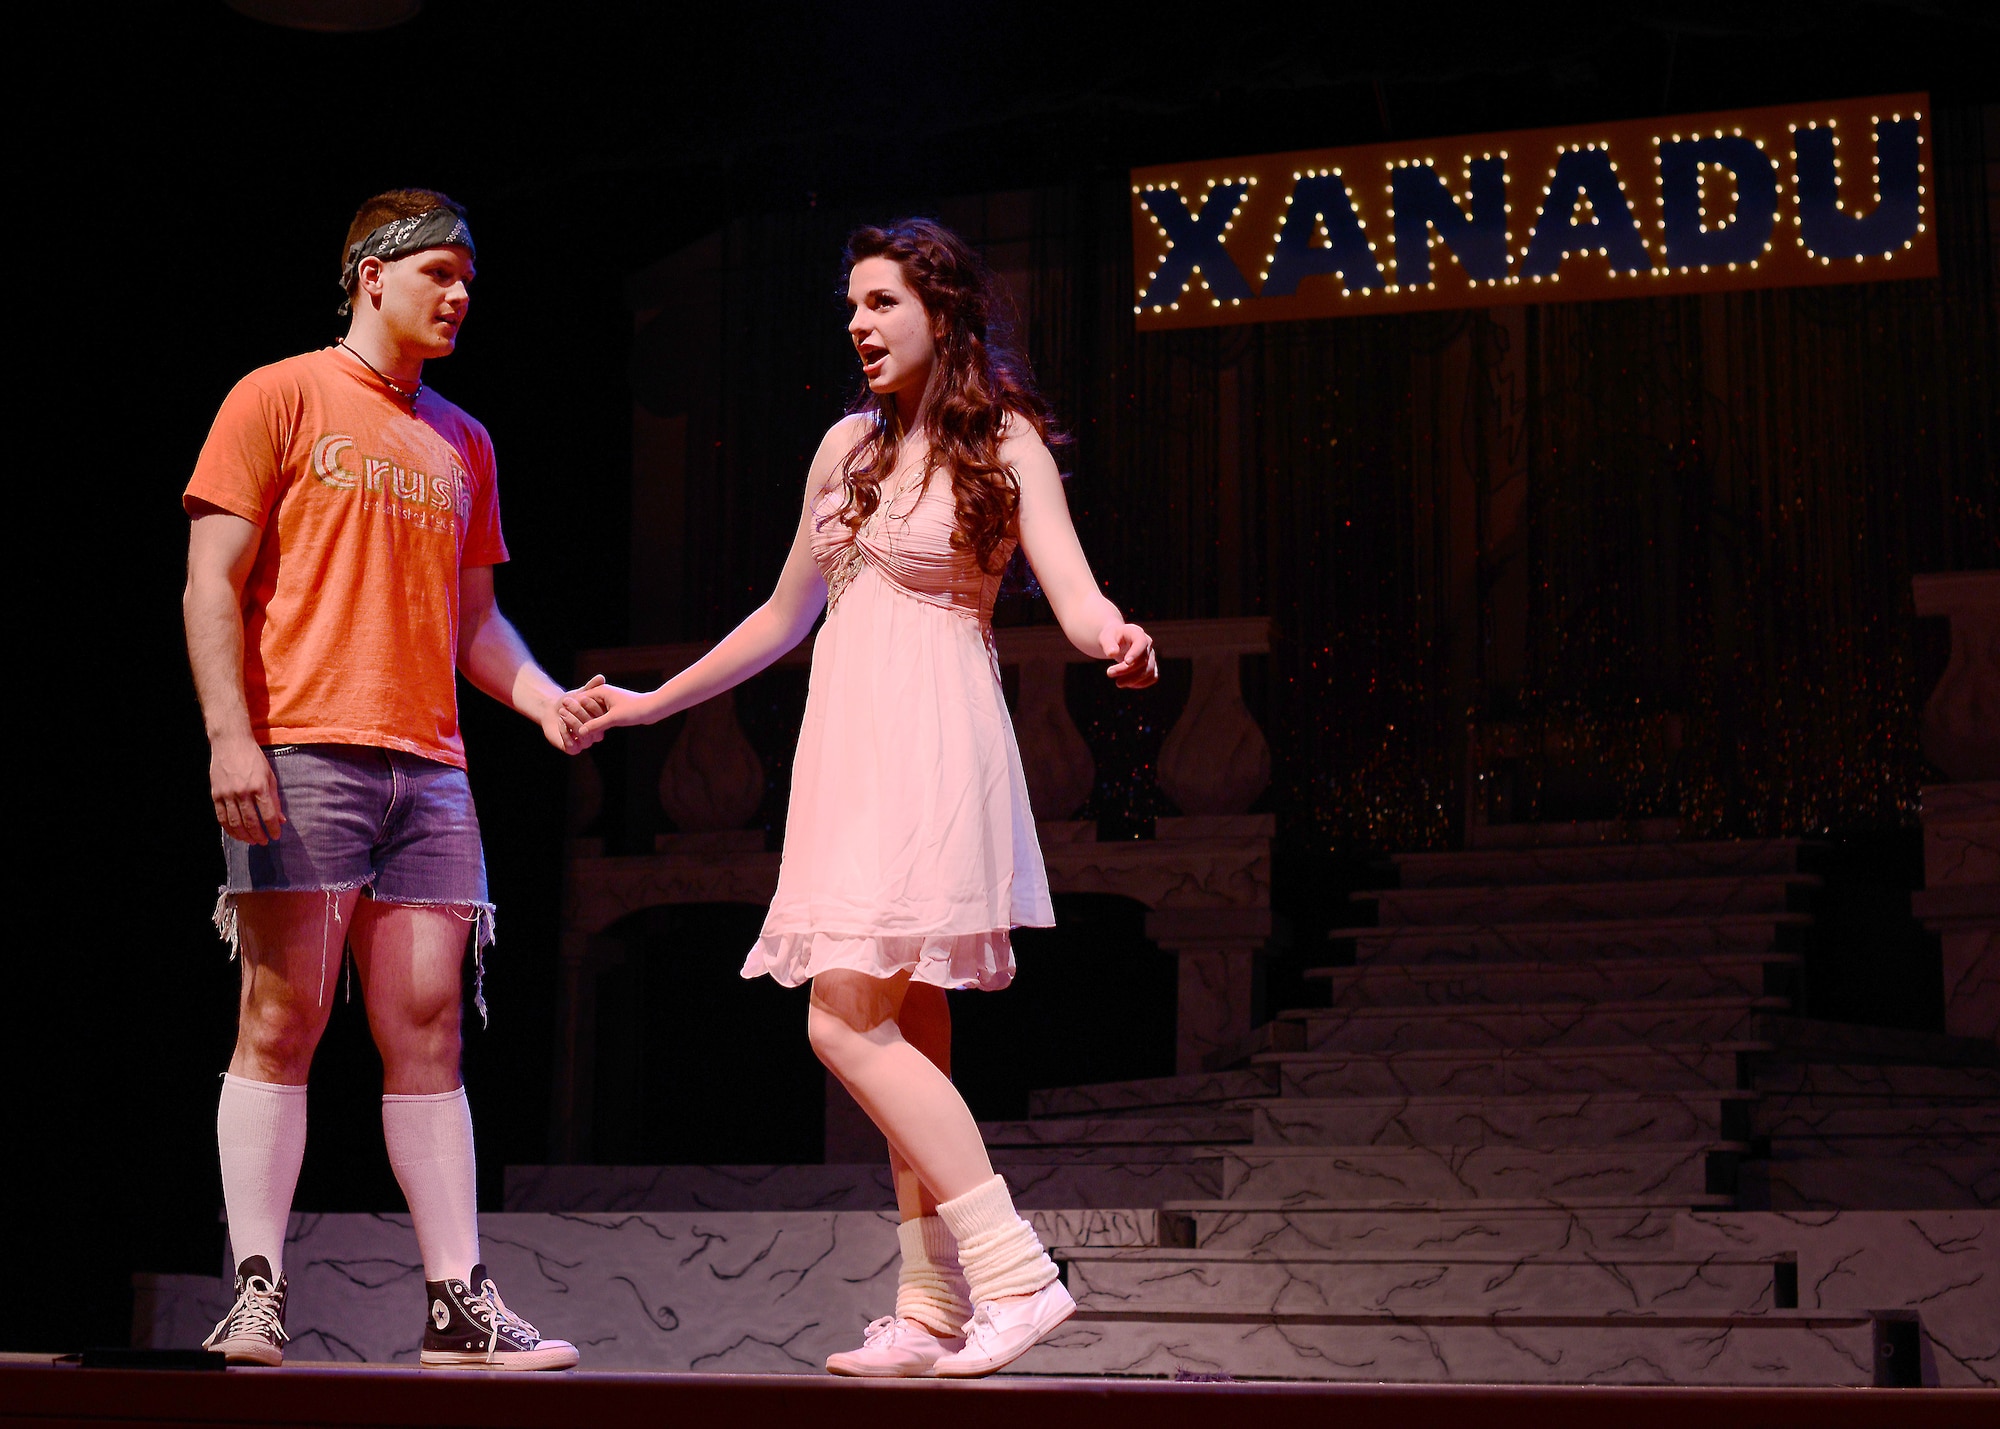 Airman 1st Class Joshua Blackburn, Detachment 8 American Forces Network broadcast journalist, and Annalisa Hardin, Aviano High School junior, perform a duet as Sonny Malone and Kira in the Aviano Community Theater performance, “Xanadu,” March 15, 2014, at Aviano Air Base, Italy.  The Aviano Community Theater cast included more than 50 Team Aviano members. (U.S. Air Force photo/Airman 1st Class Deana Heitzman)